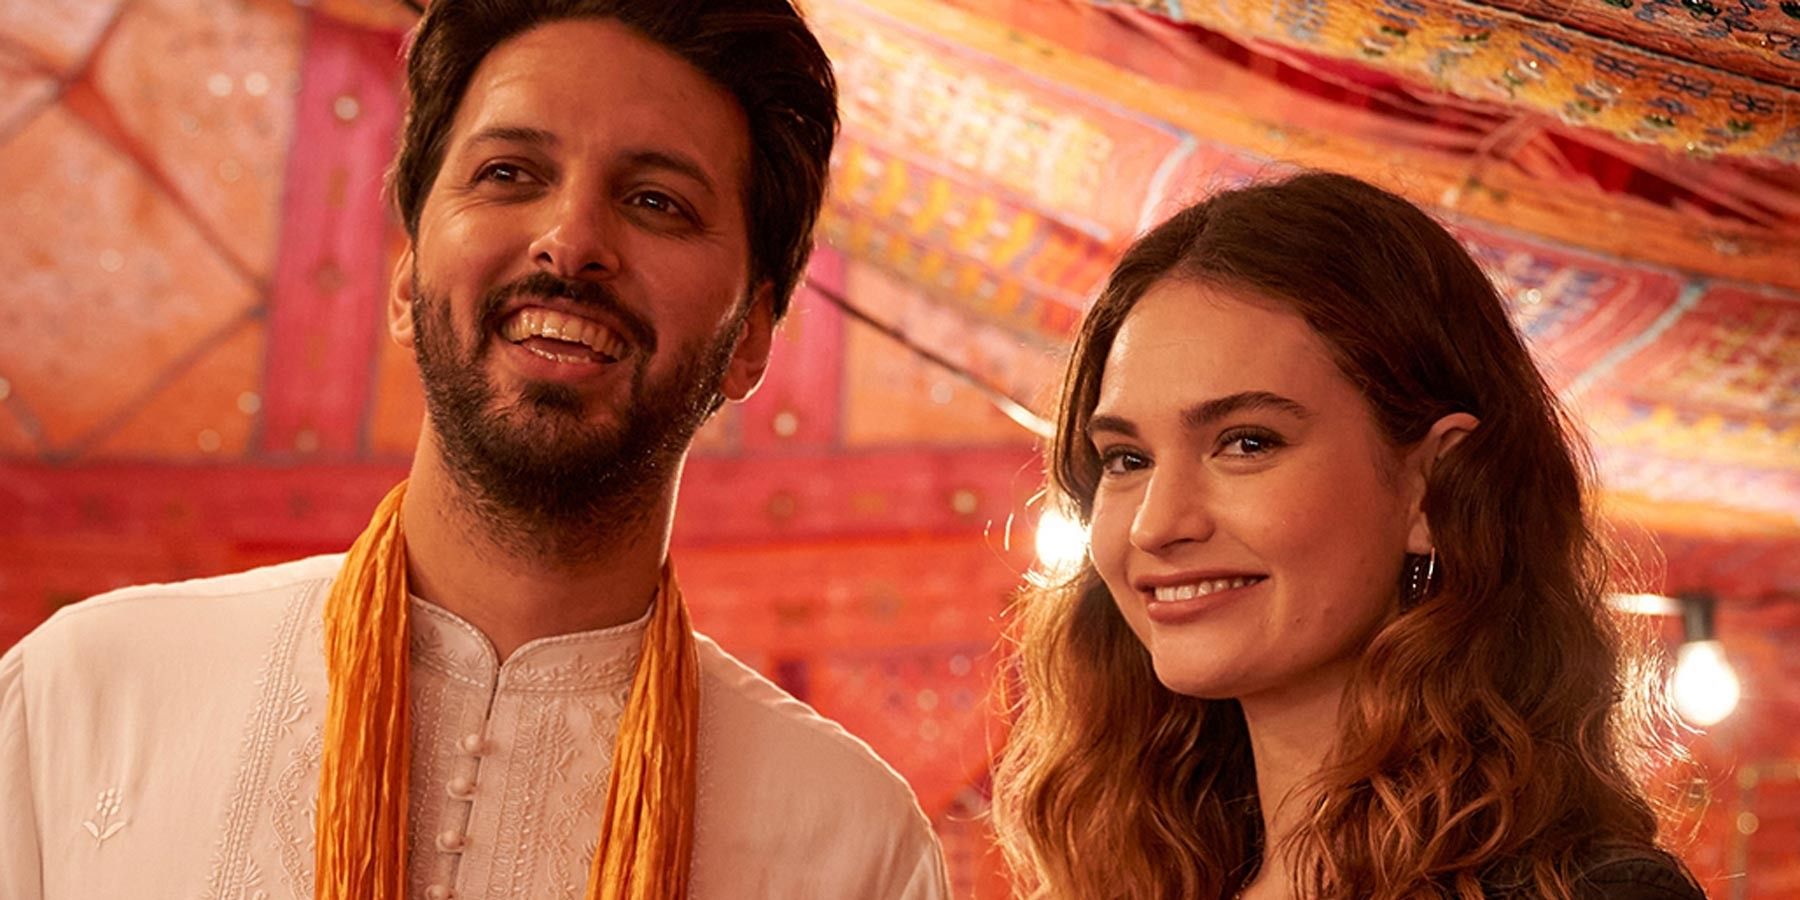 Shazad Latif and Lily James in What's Love Got to Do with It